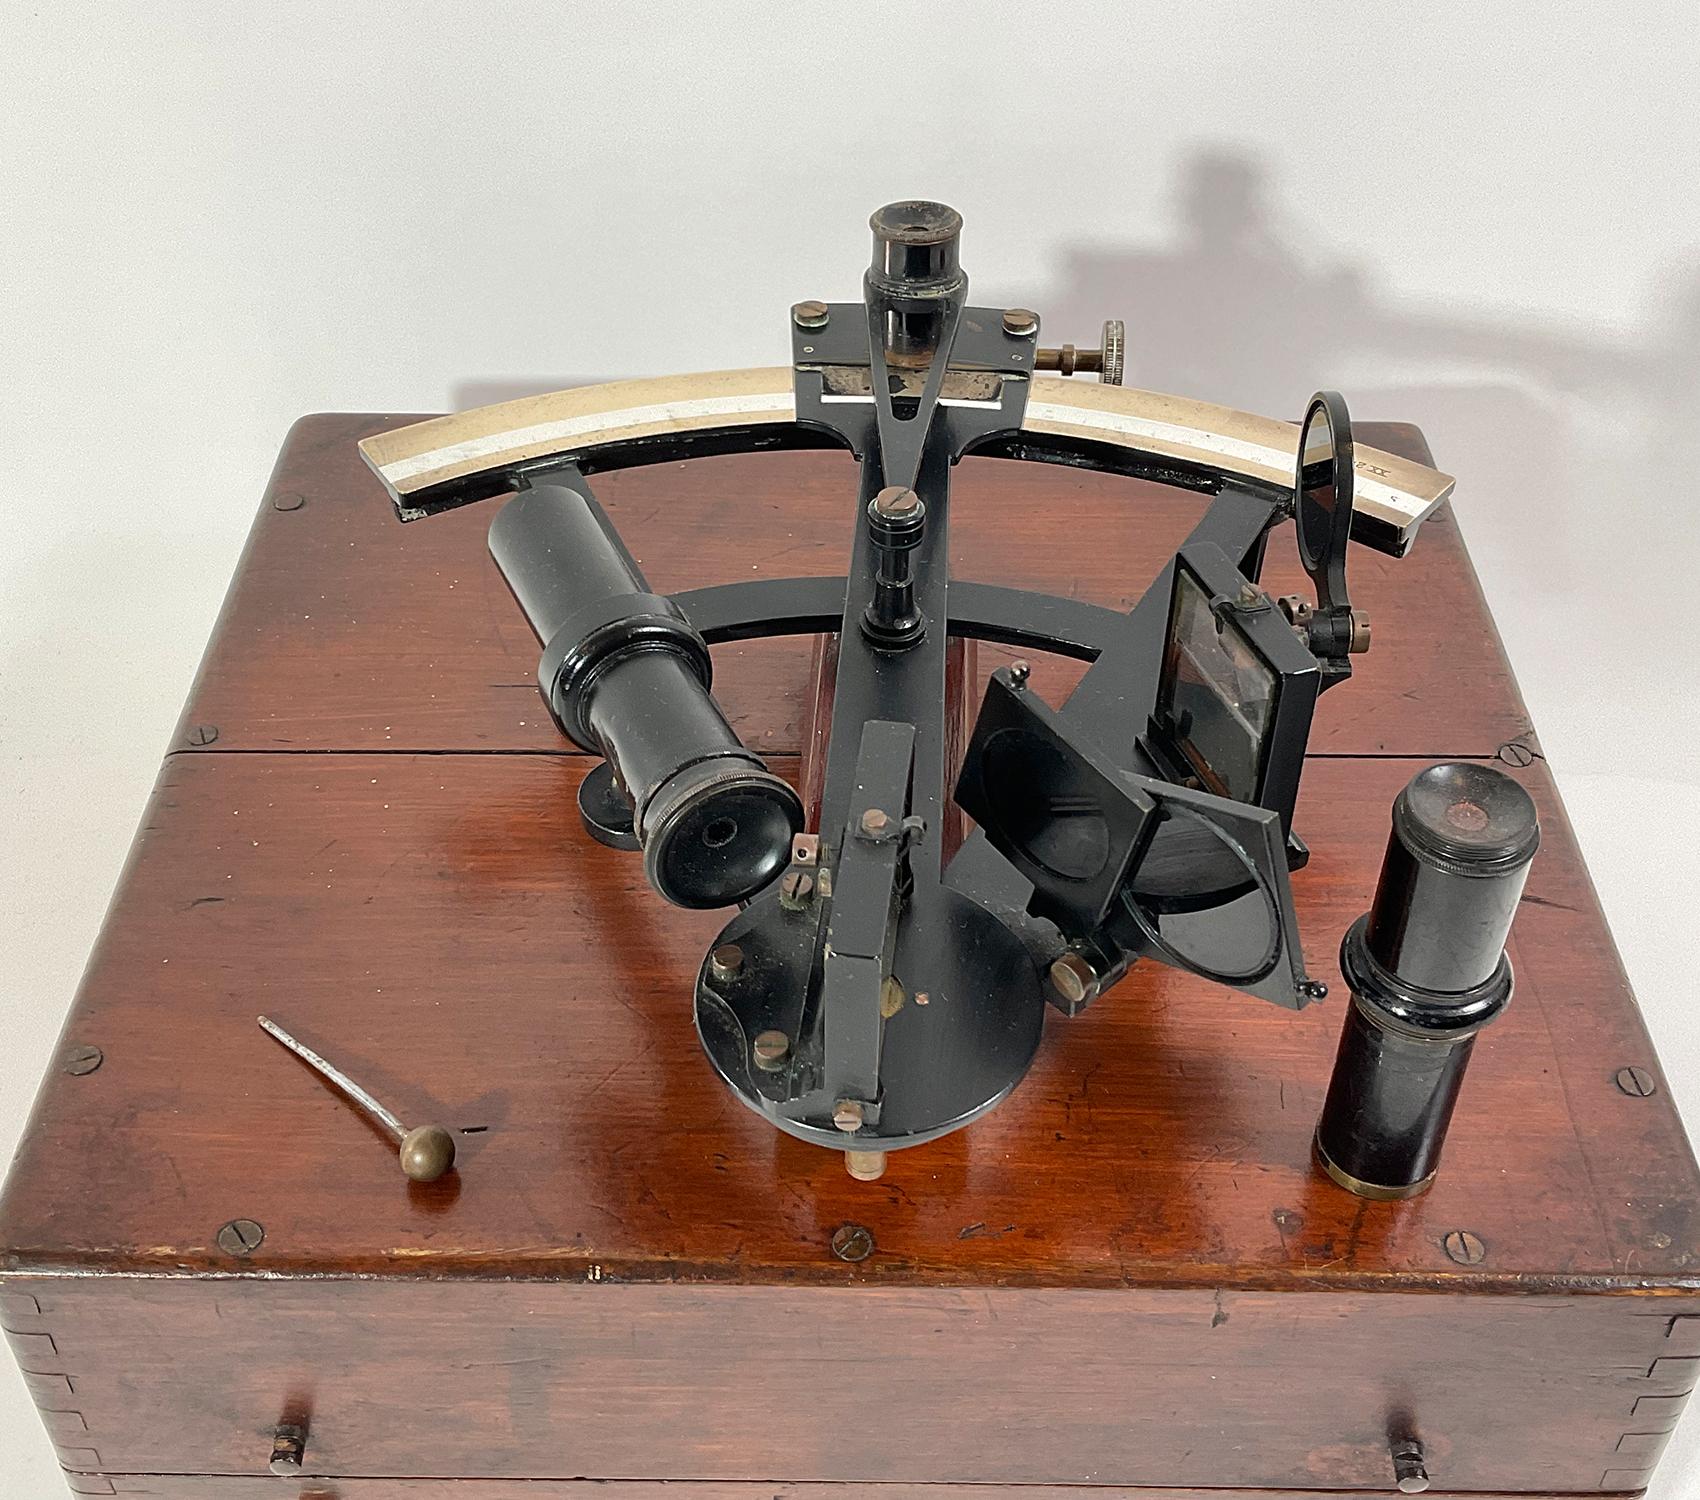 Late Nineteenth Navigators Sextant. T Frame design. Box has label of H.A. Johannesen Compass Adjuster, Fish Dock Rd., Grimsby. Circa 1920. Phone number on label is 483.